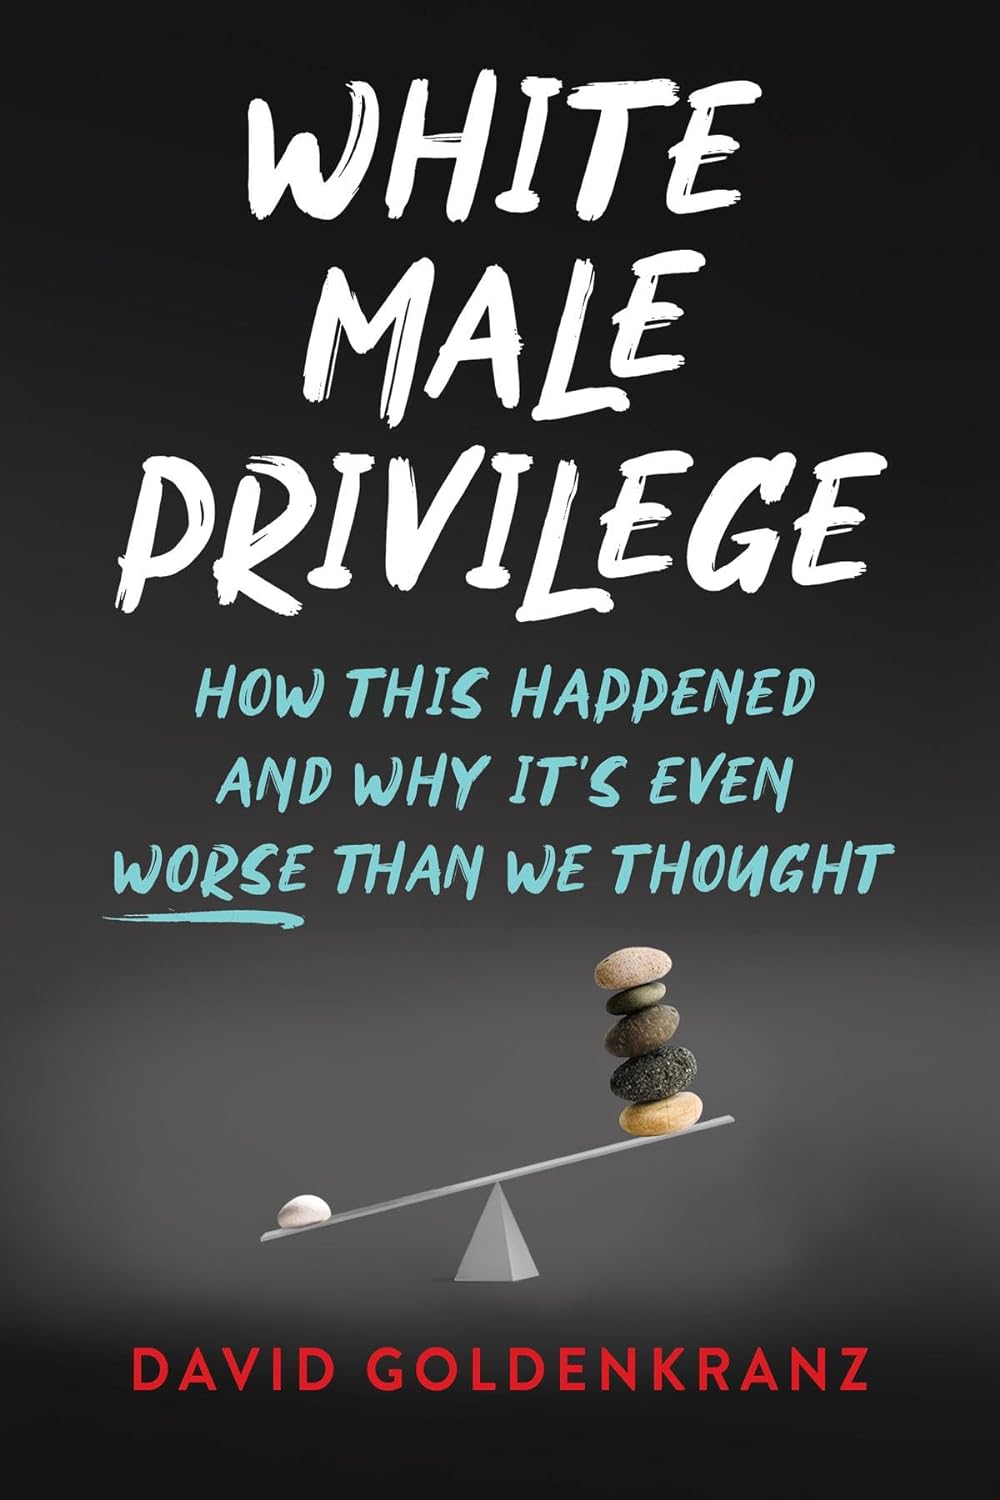 White Male Privilege: How This Happened and Why It's Even Worse than We Thought (Paperback)